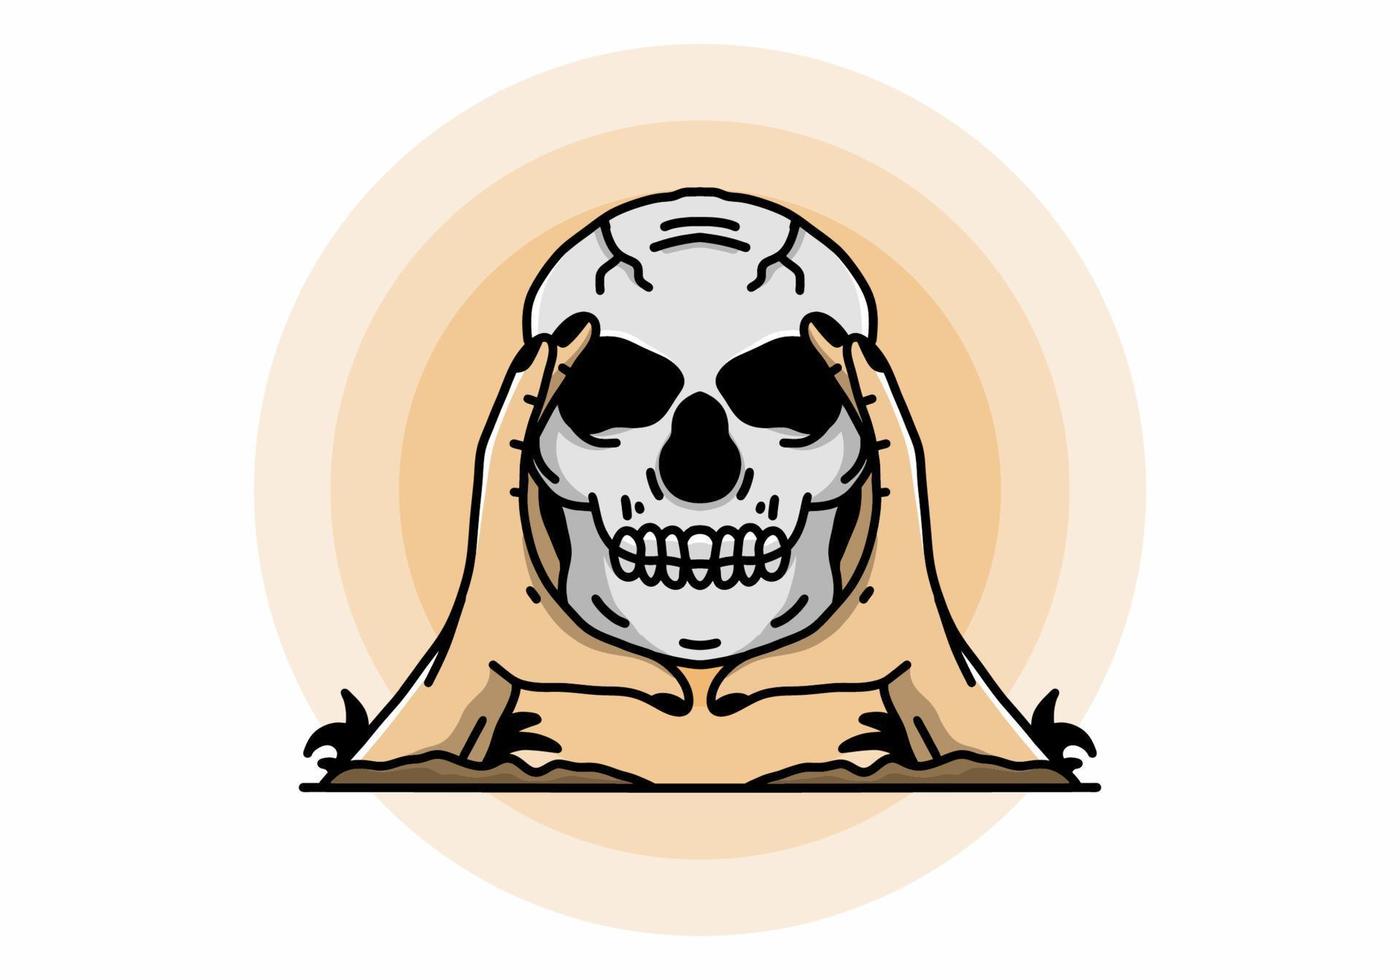 Two hand holding a skull illustration badge vector